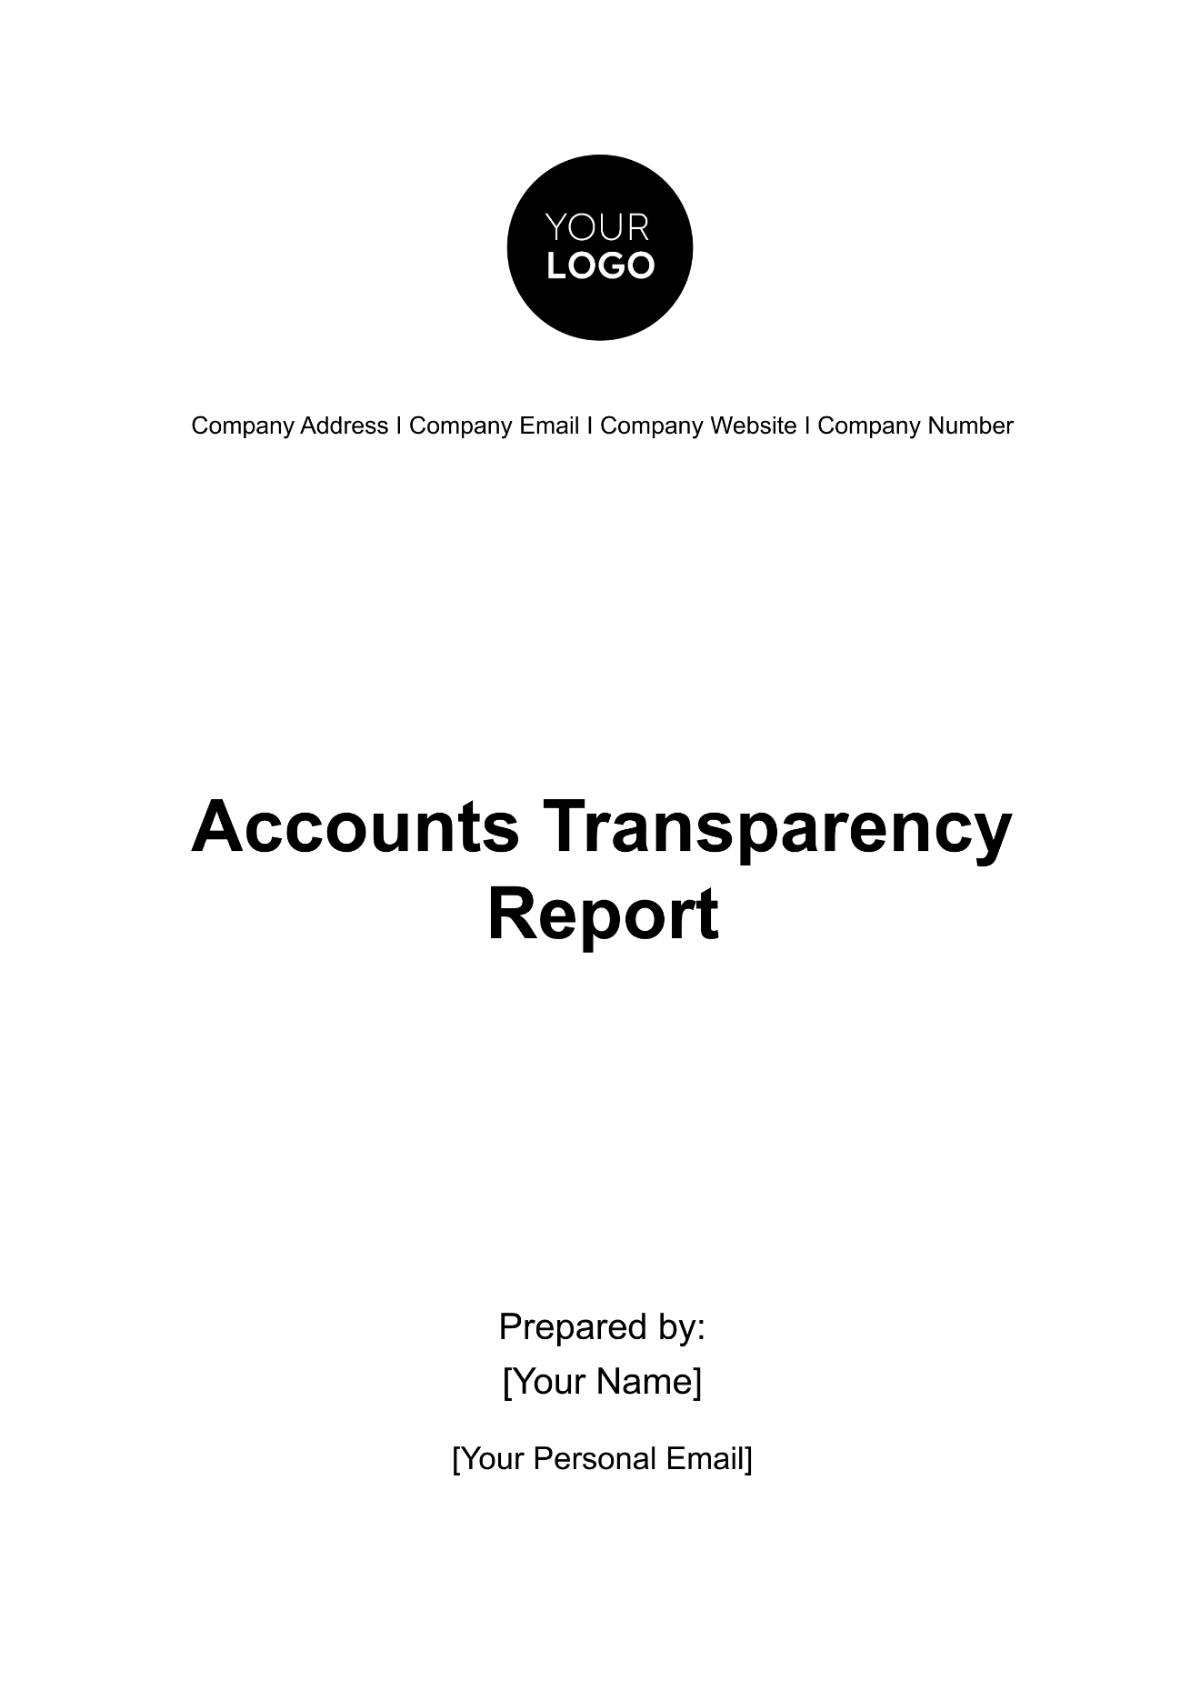 Accounts Transparency Report Template